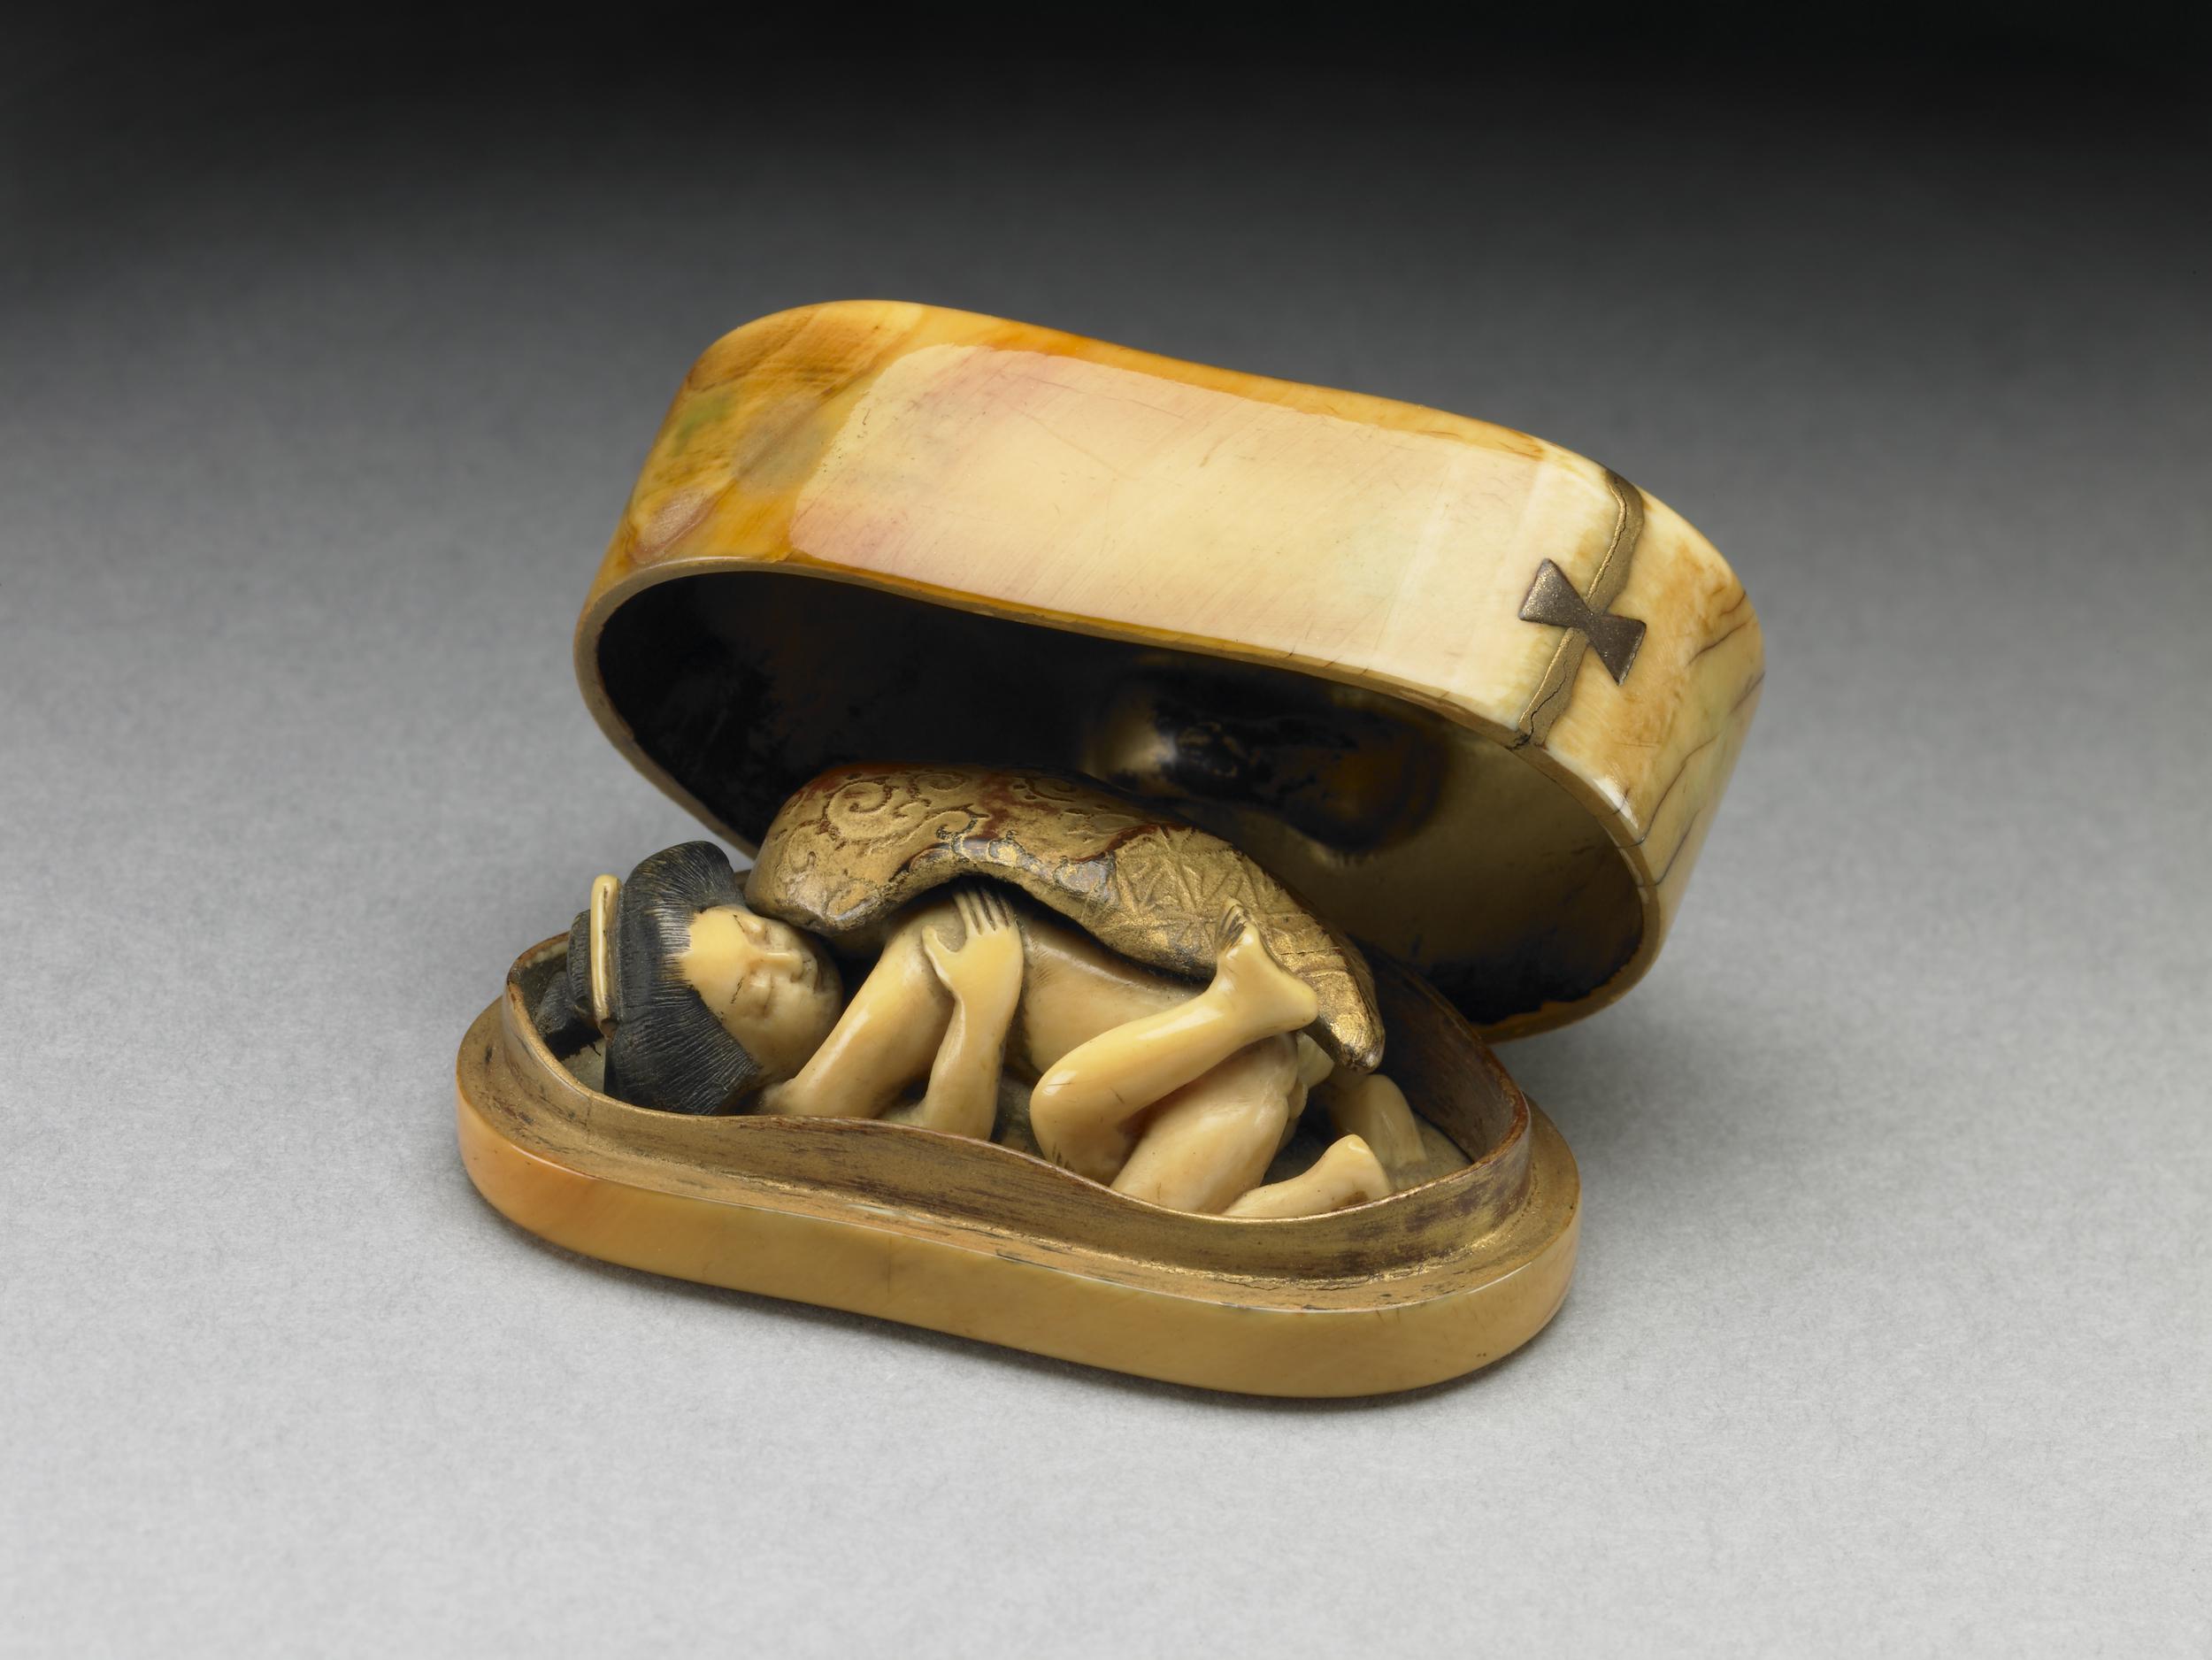 A netsuke box which opens to reveal a couple making love. Made of Ivory, gold and lacquer. Japan, Edo period, 18th century CE, now housed at the British museum.jpg